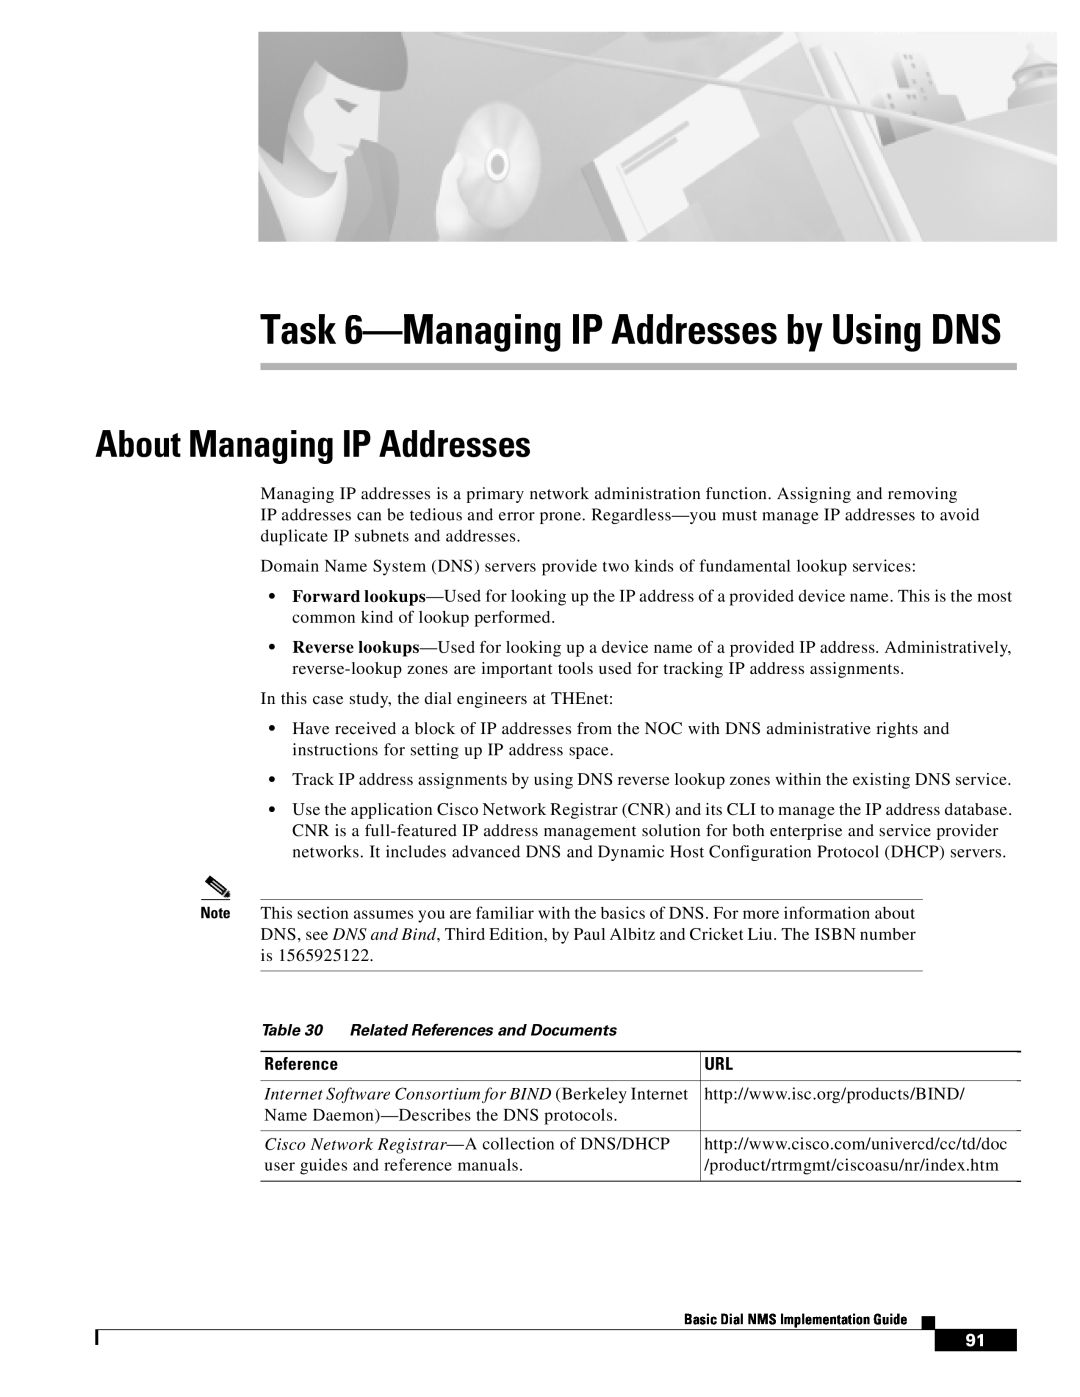 Cisco Systems Dial NMS manual Task 6-Managing IP Addresses by Using DNS, About Managing IP Addresses, Reference 